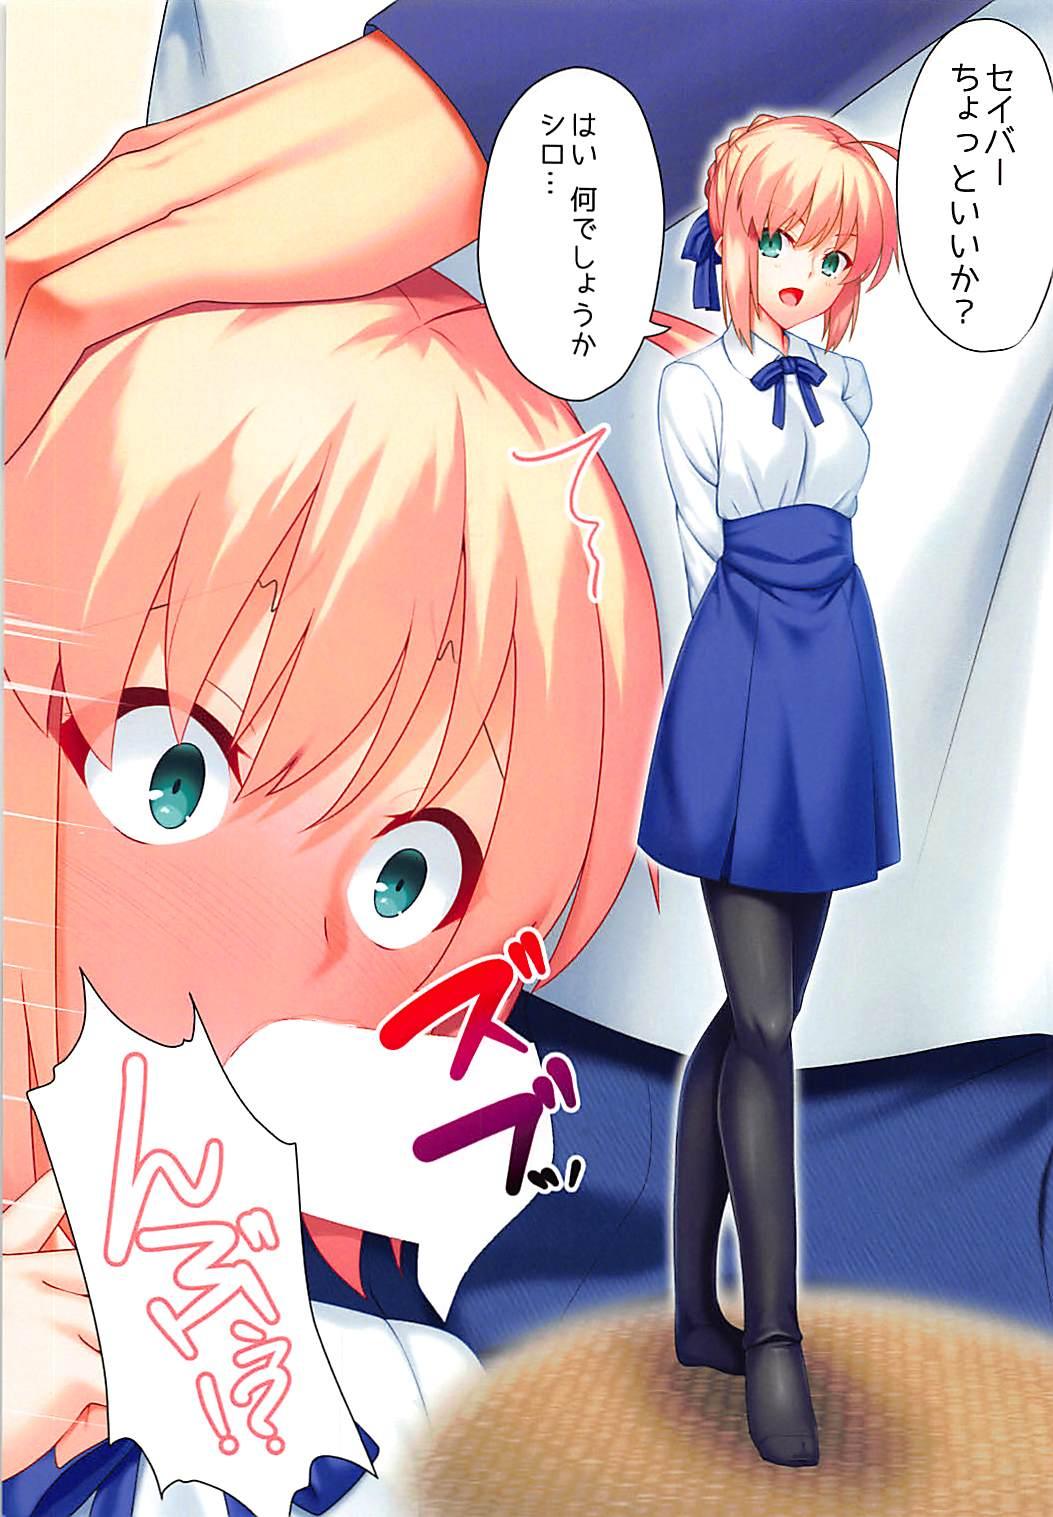 Free Teenage Porn HaraiSaber Hon - Fate grand order Fate stay night Amature Porn - Page 2